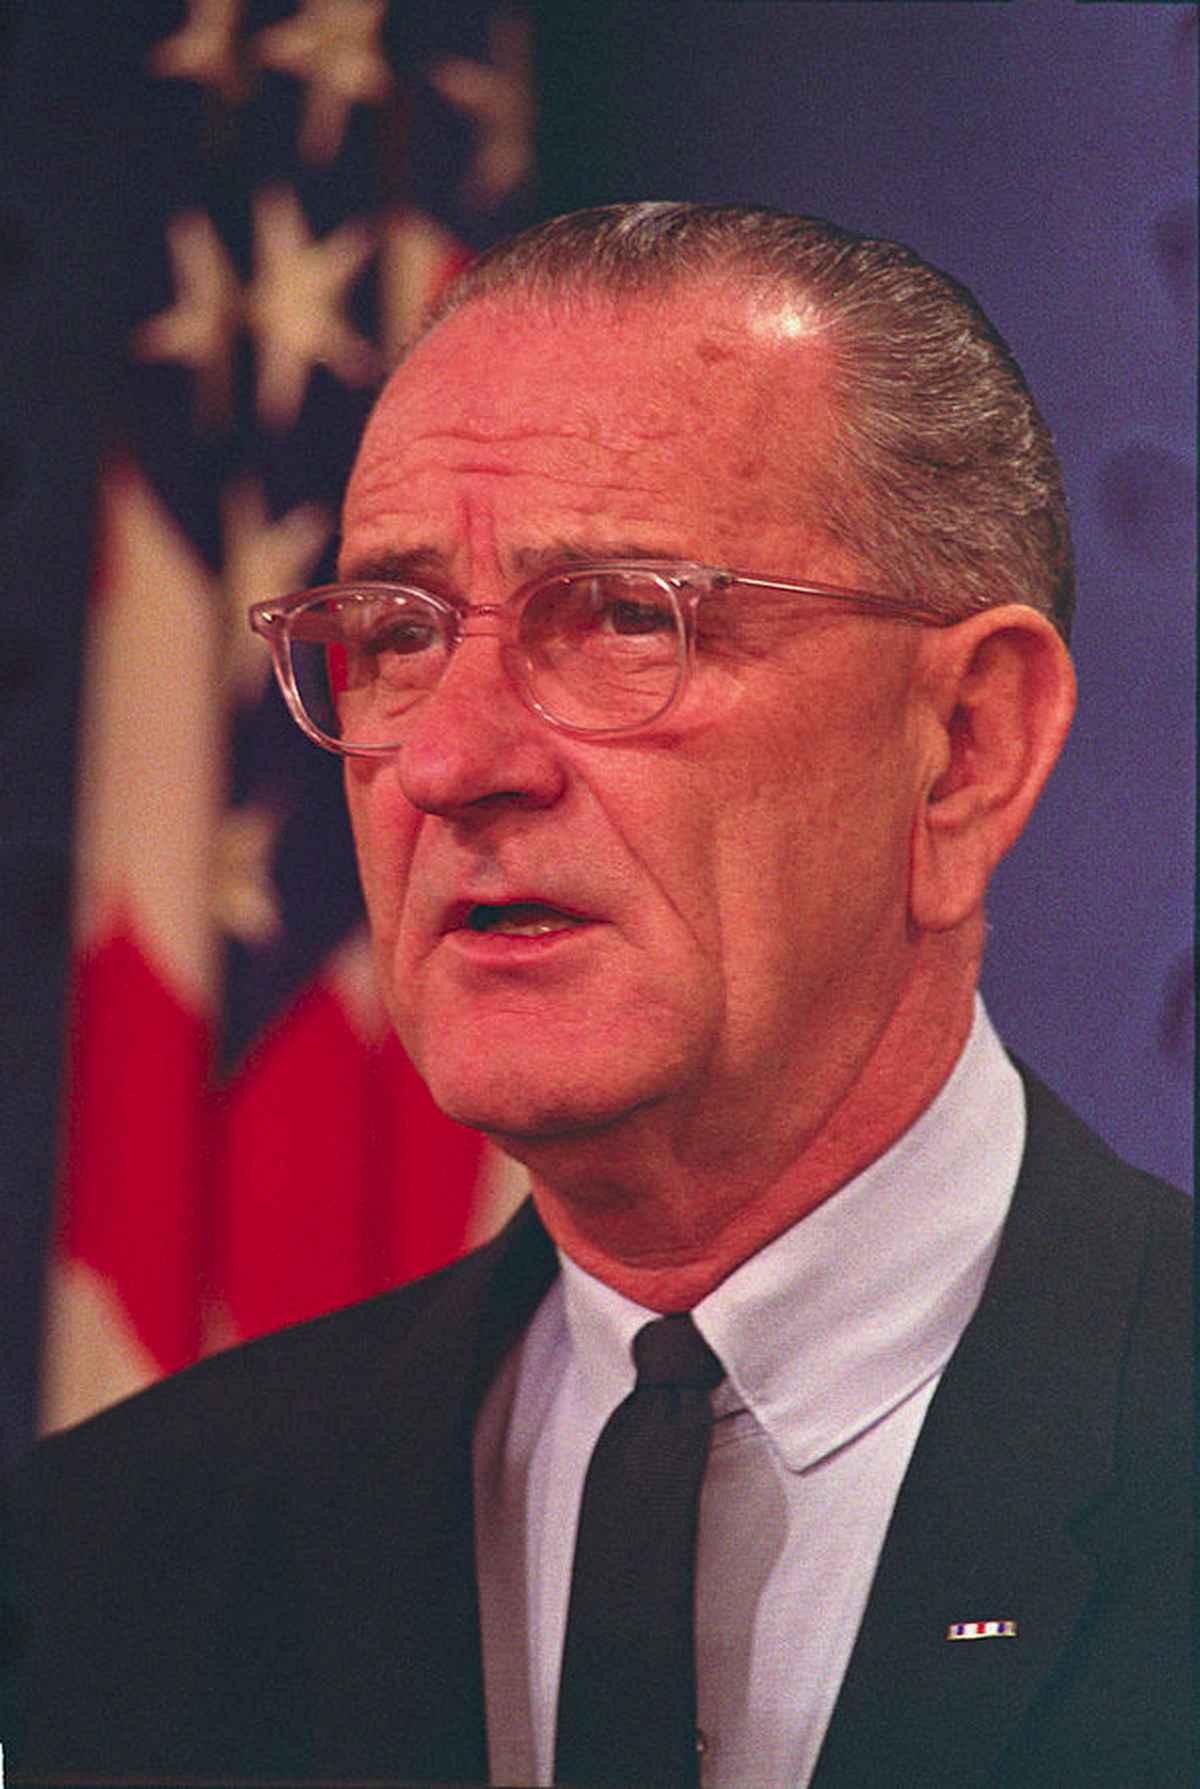 President Lyndon Johnson pictured at the Honolulu Conference on the Vietnam War